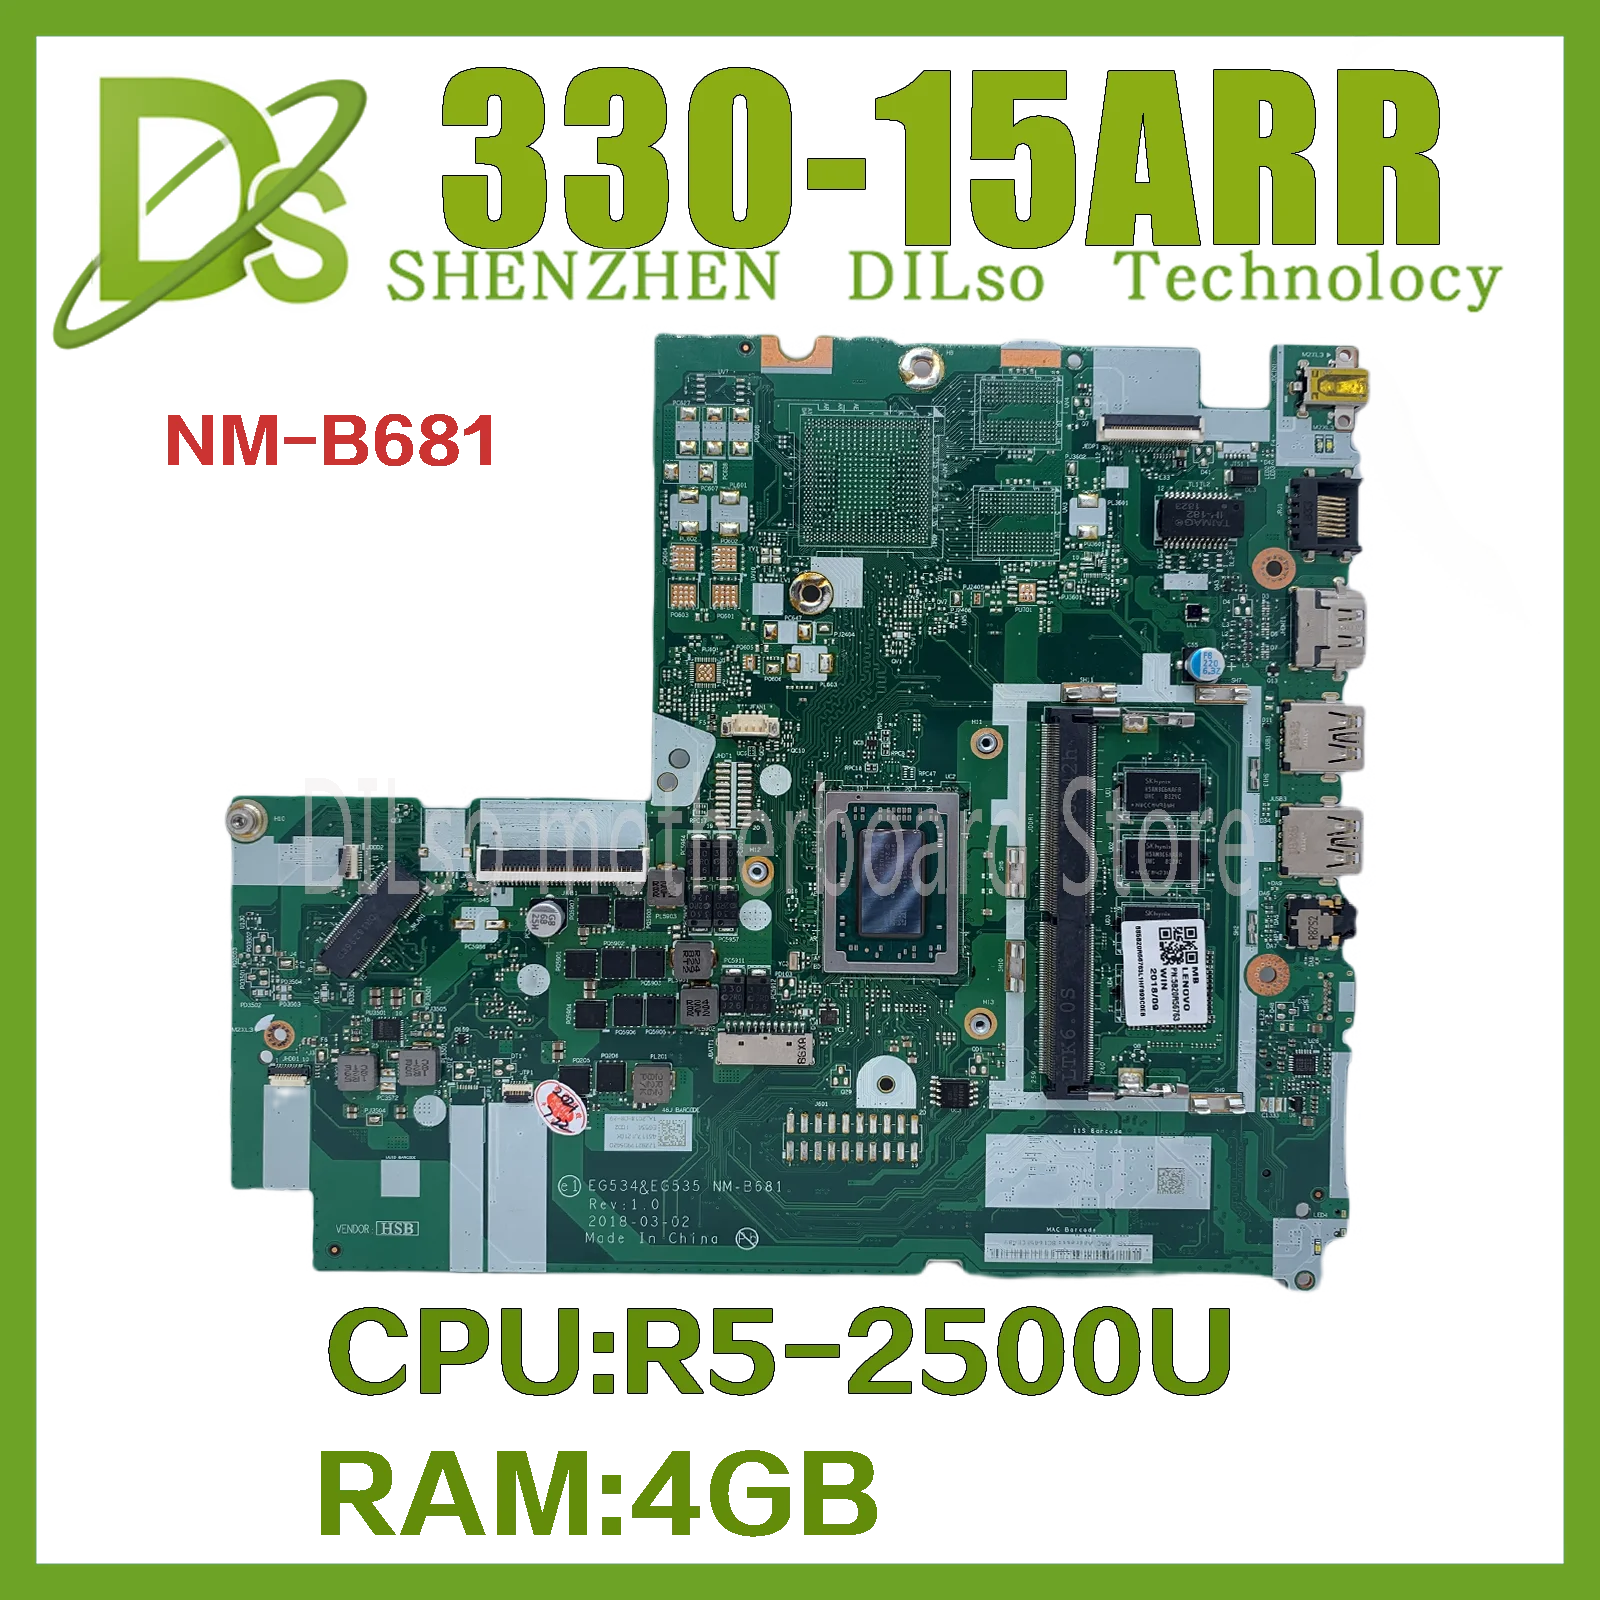 

Kefu NEW NM-B681 mainboard For lenovo Ideapad 330-15ARR Laptop Motherboard With Ryzen R5-2500 CPU 4GB-RAM 100% Working Well